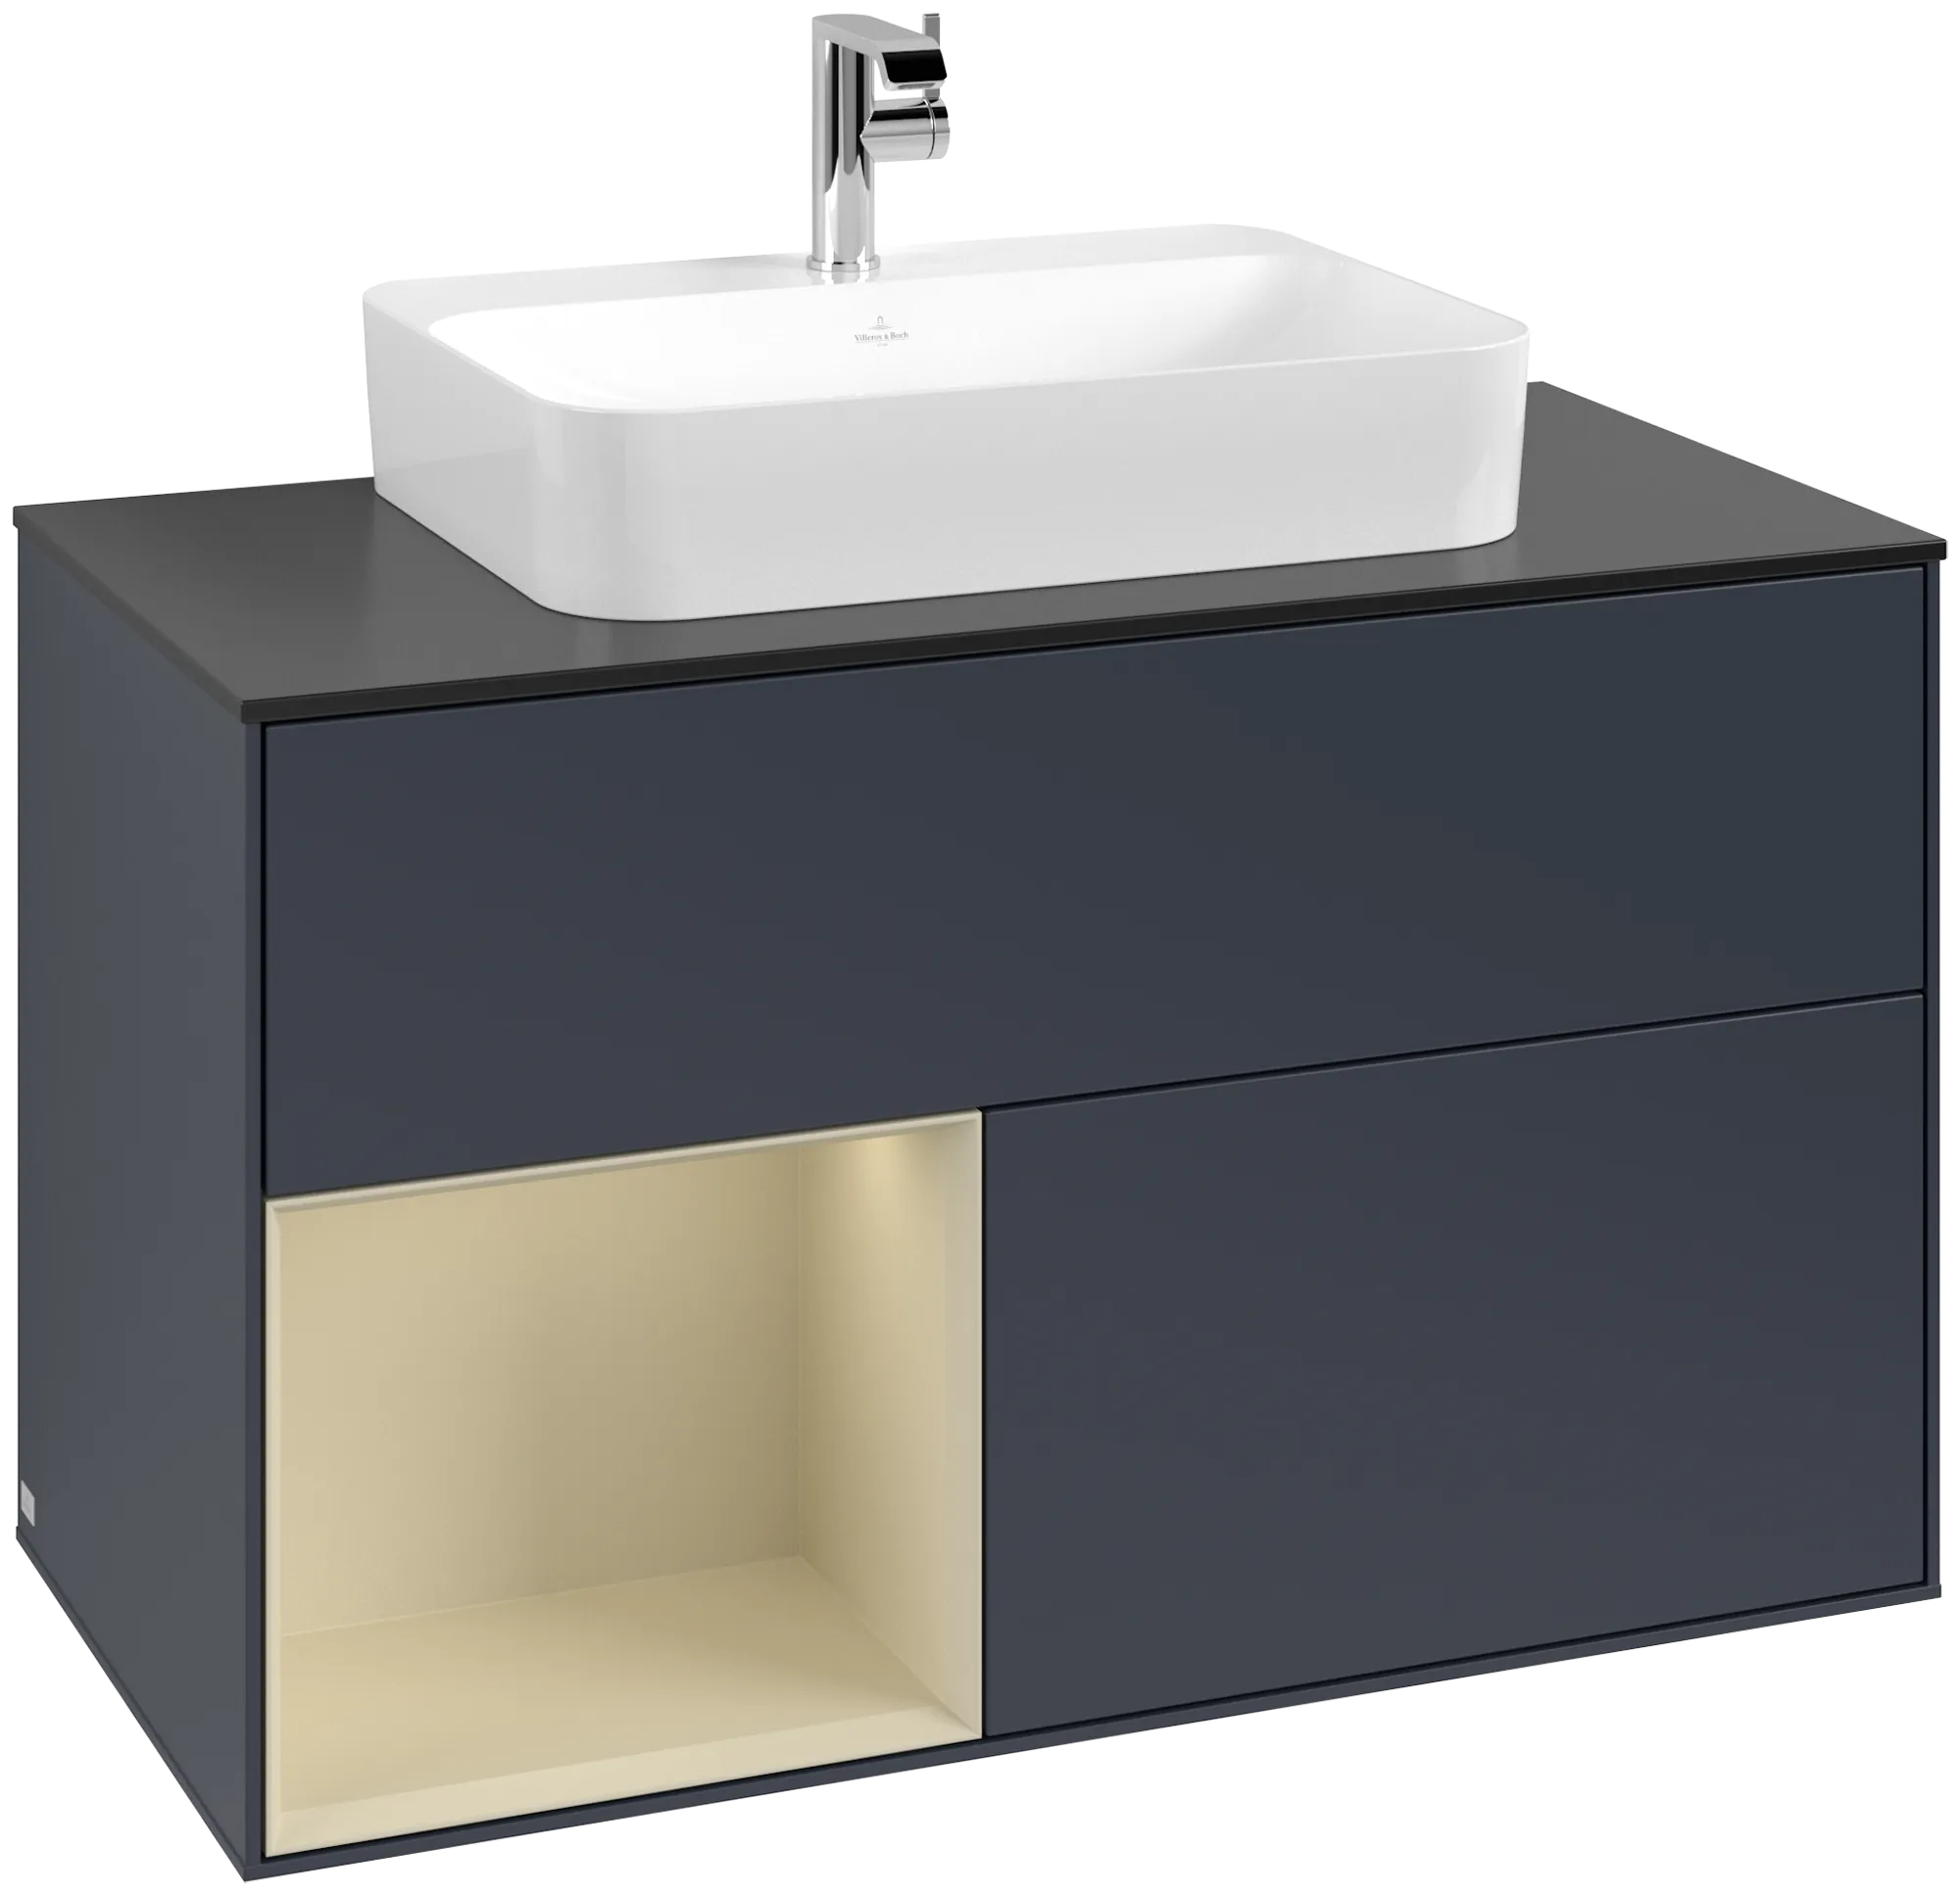 Picture of VILLEROY BOCH Finion Vanity unit, with lighting, 2 pull-out compartments, 1000 x 603 x 501 mm, Midnight Blue Matt Lacquer / Silk Grey Matt Lacquer / Glass Black Matt #G362HJHG